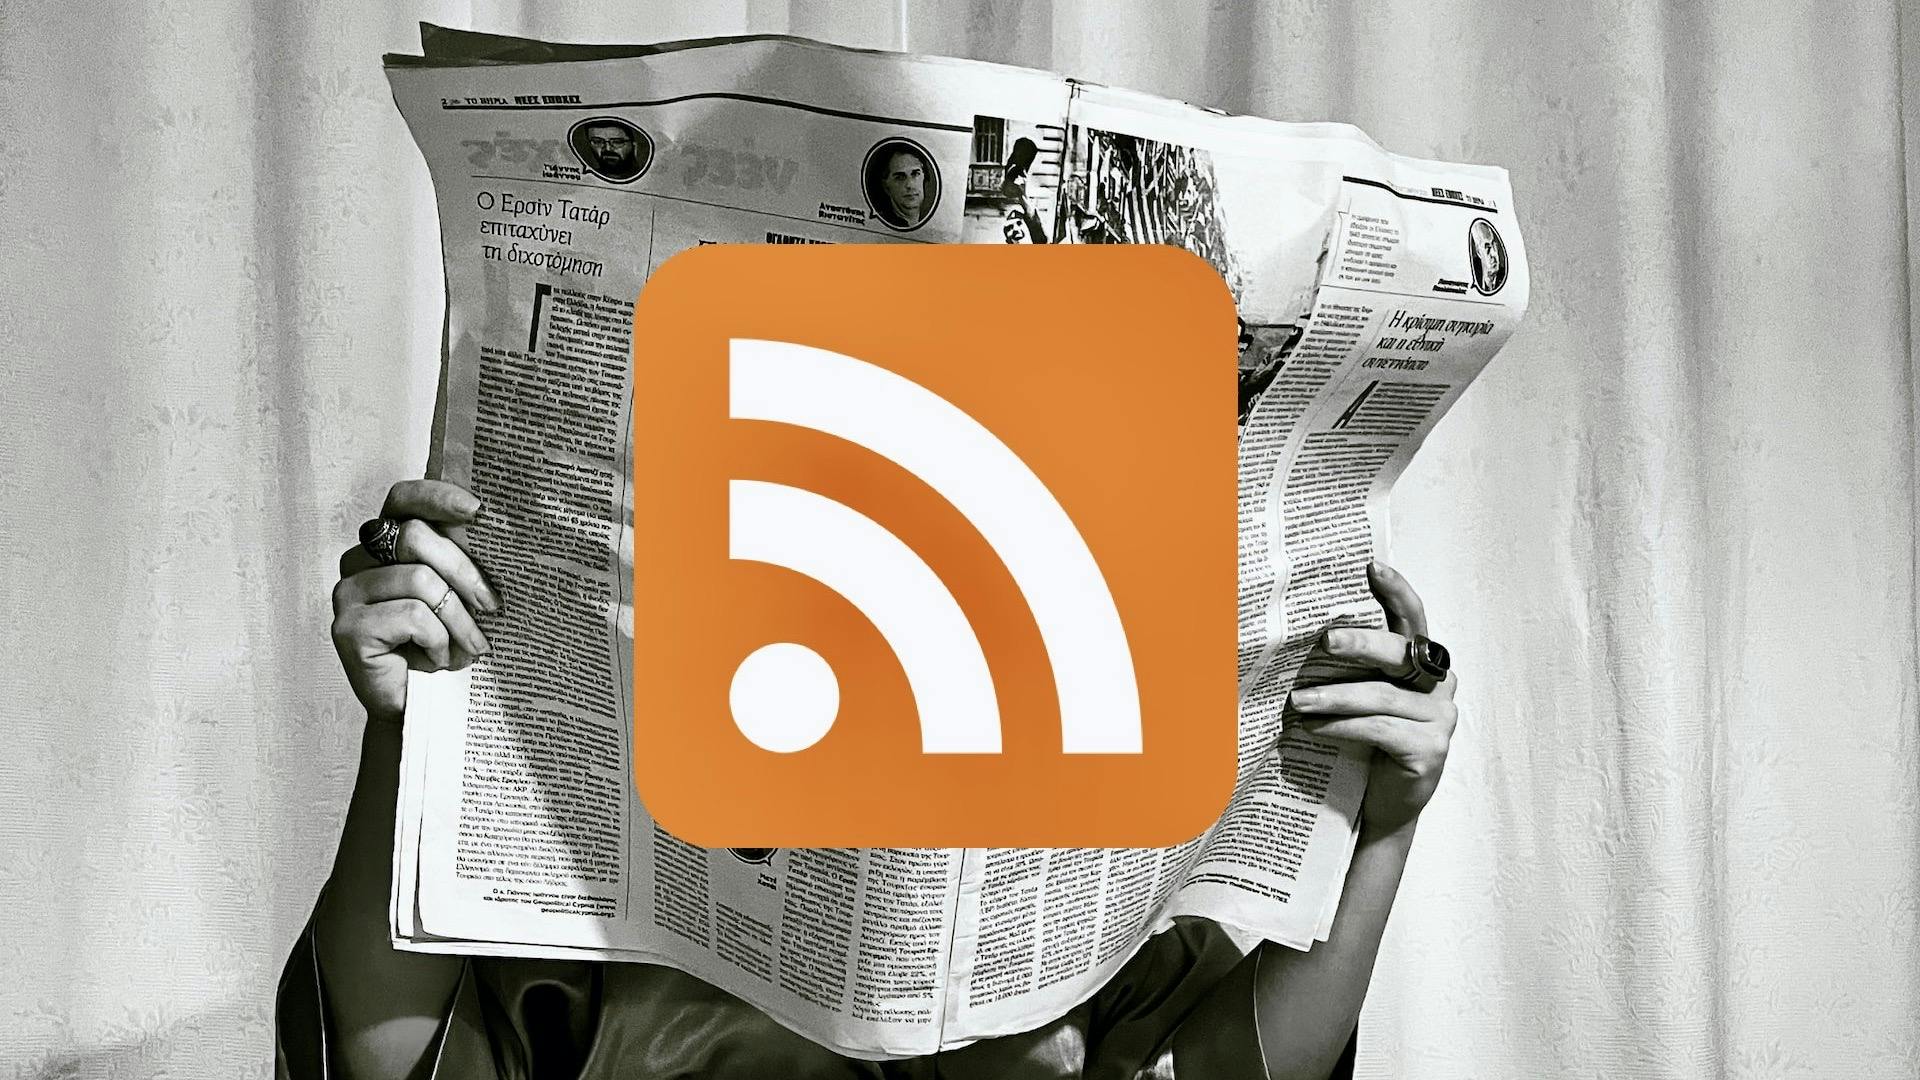 RSS feed over a newspaper